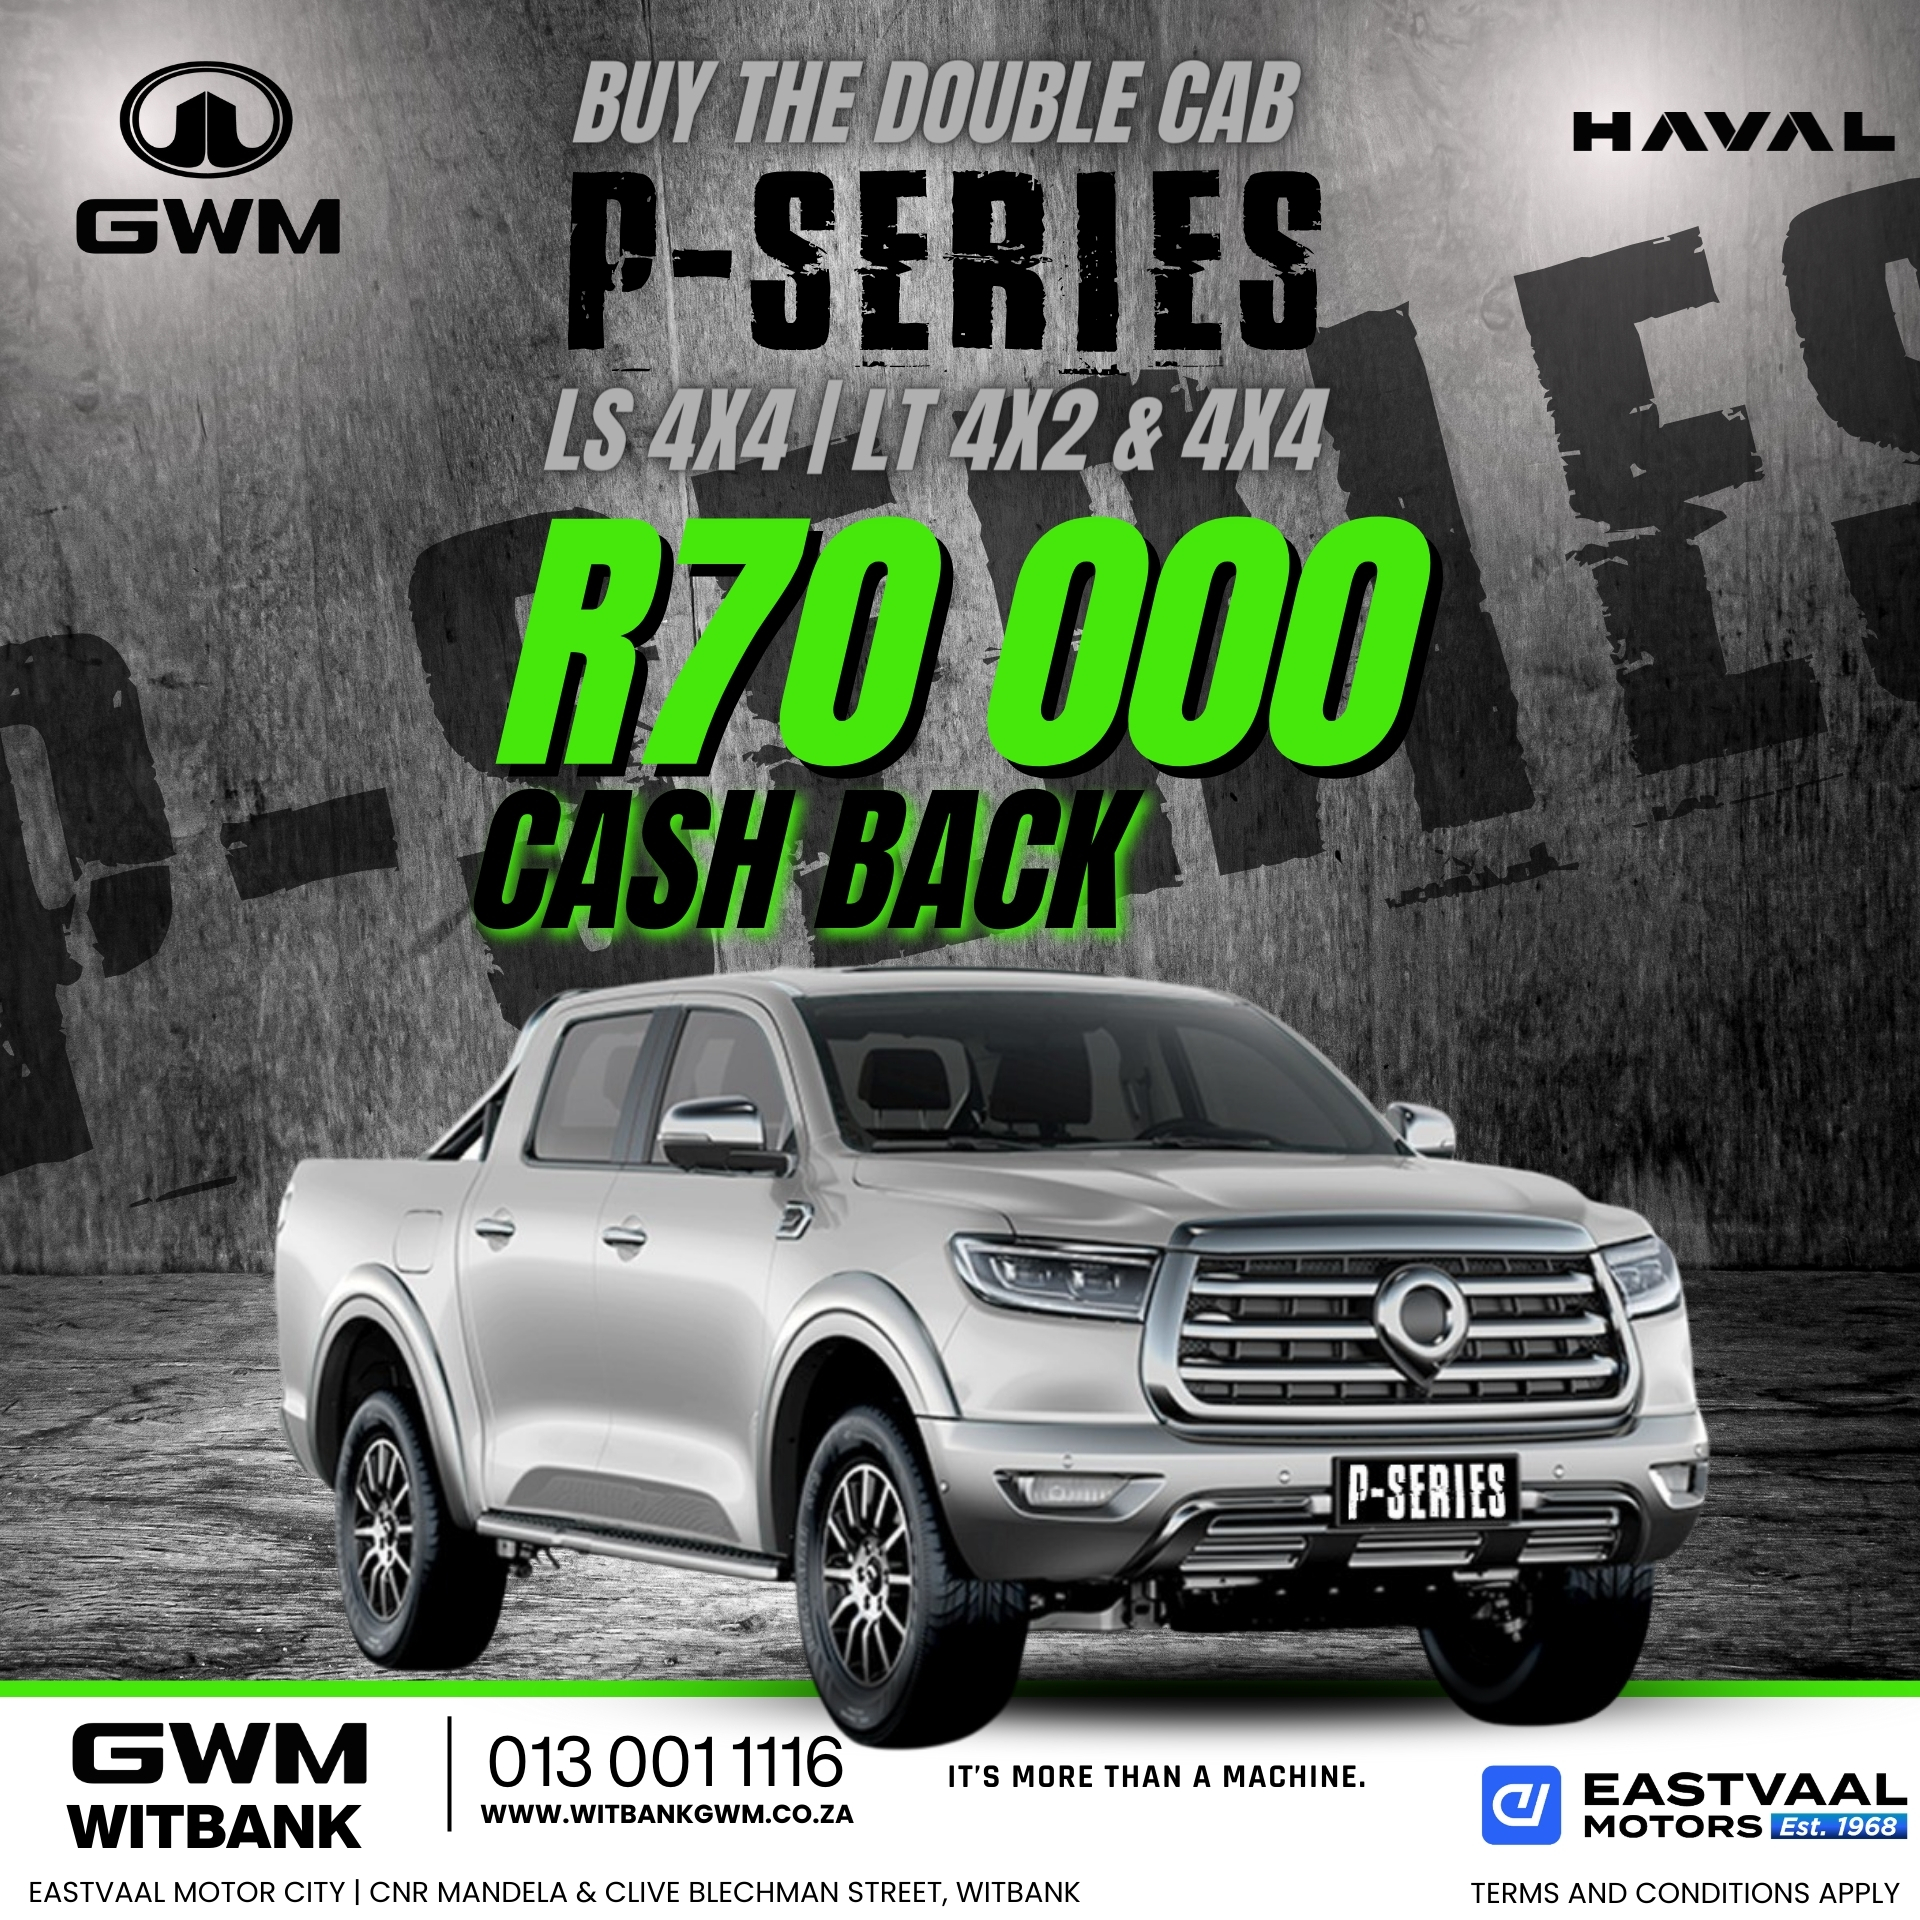 Discover the unmatched luxury and rugged reliability of Haval GWM this July at Eastvaal Motor City! image from 